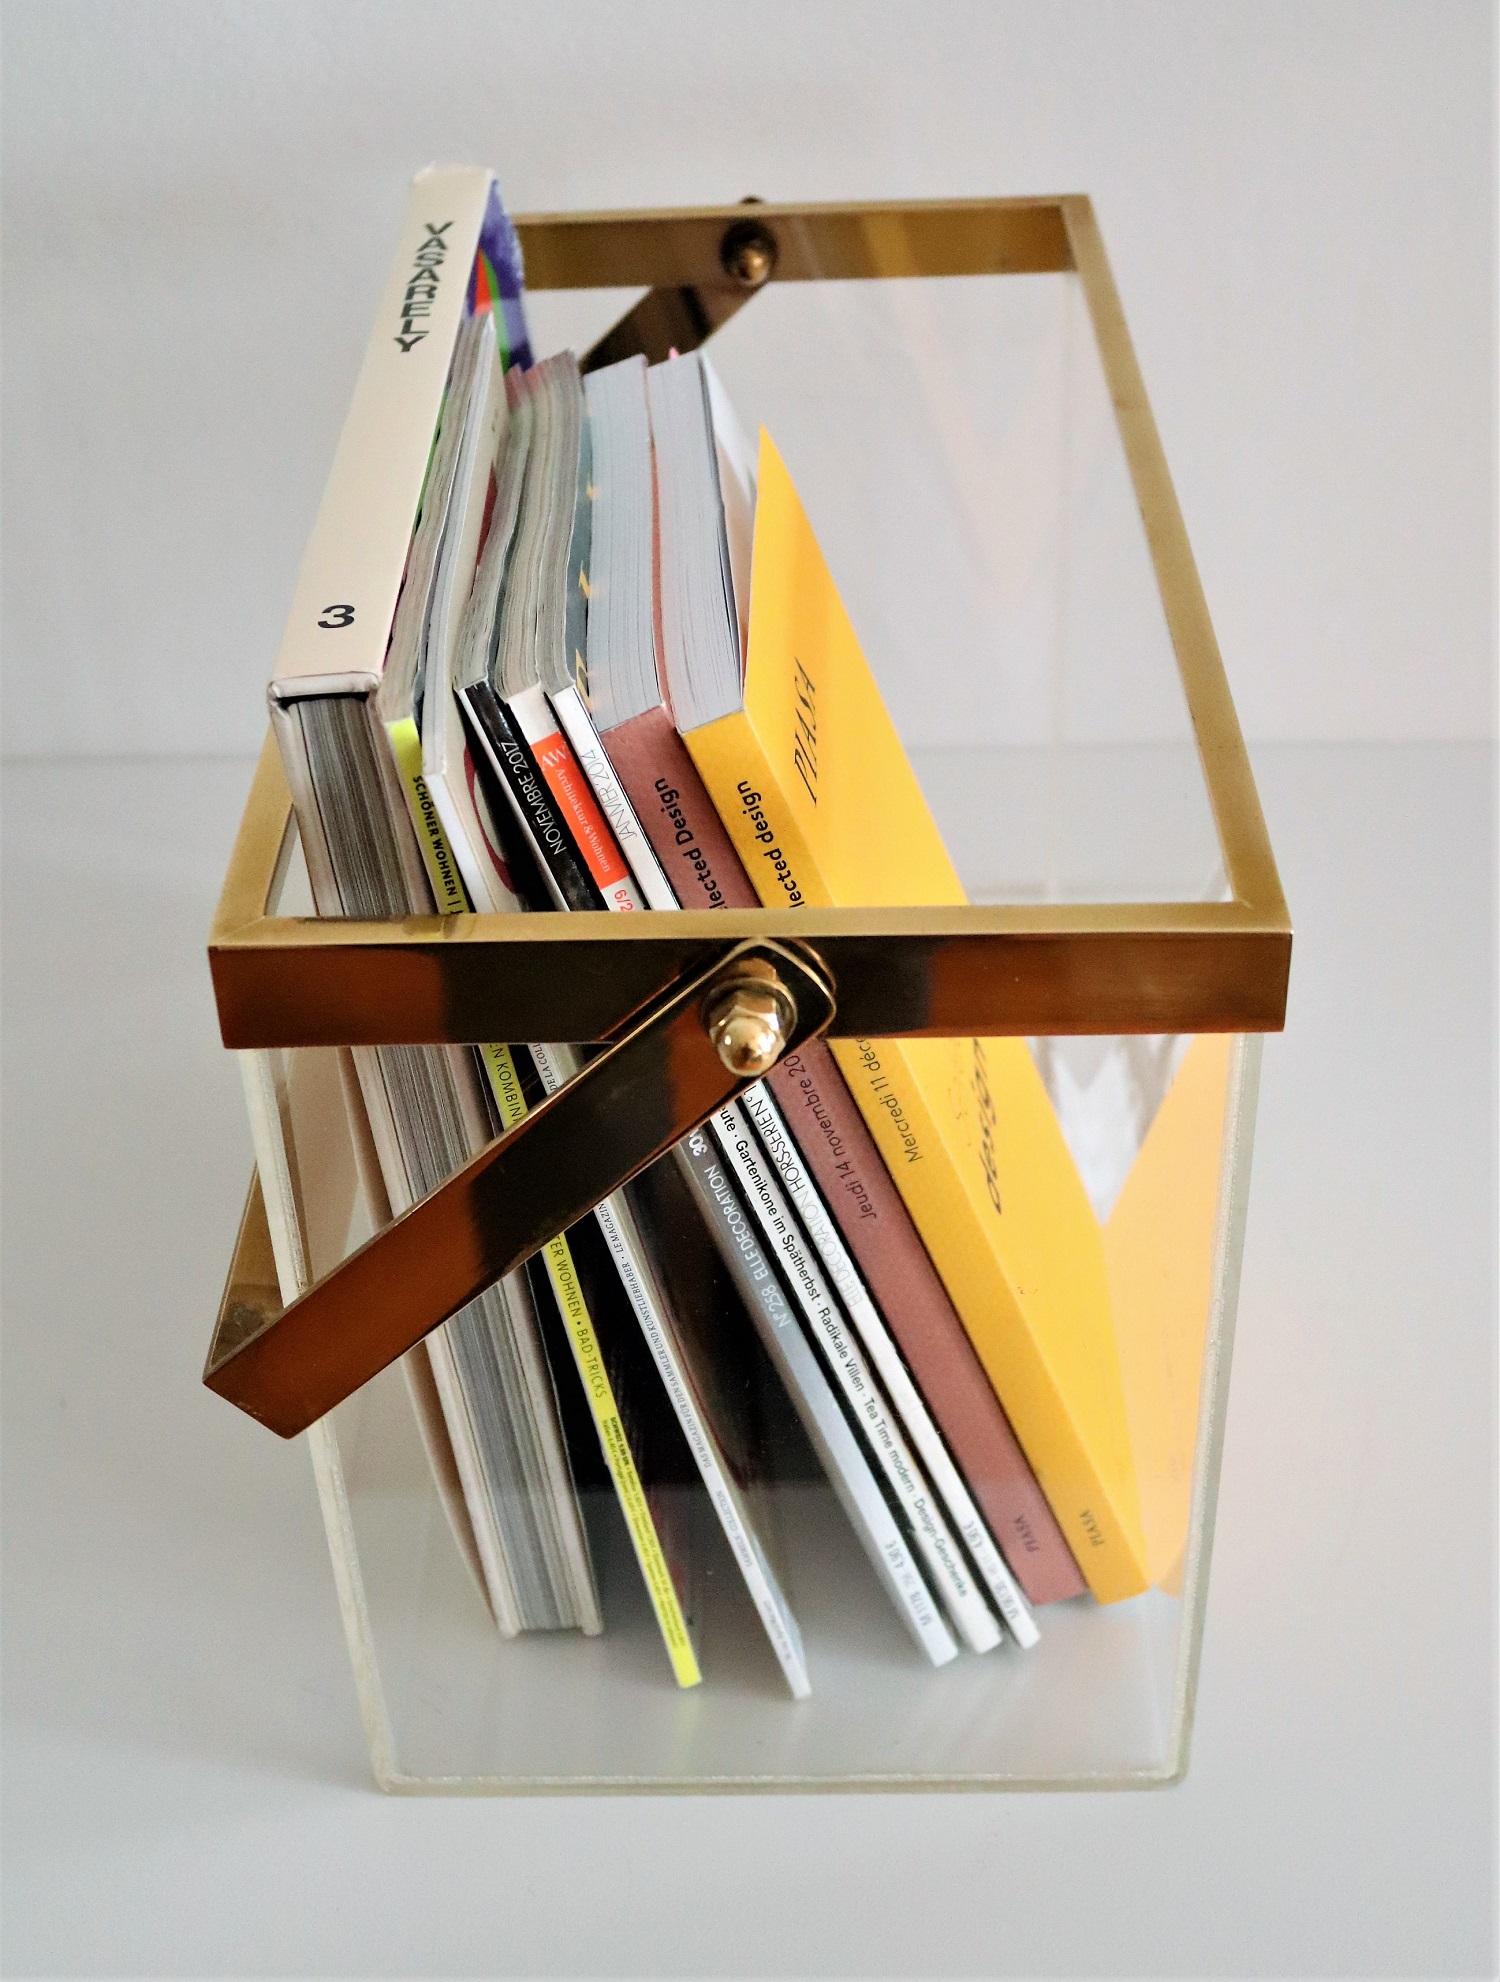 Gorgeous magazine holder or magazine rack made of solid Lucite material with shiny brass details, Made in Italy in the 1970s.
This basket is multi-purpose and can be used of course for many different objects.
Due to its size it keeps quite a big